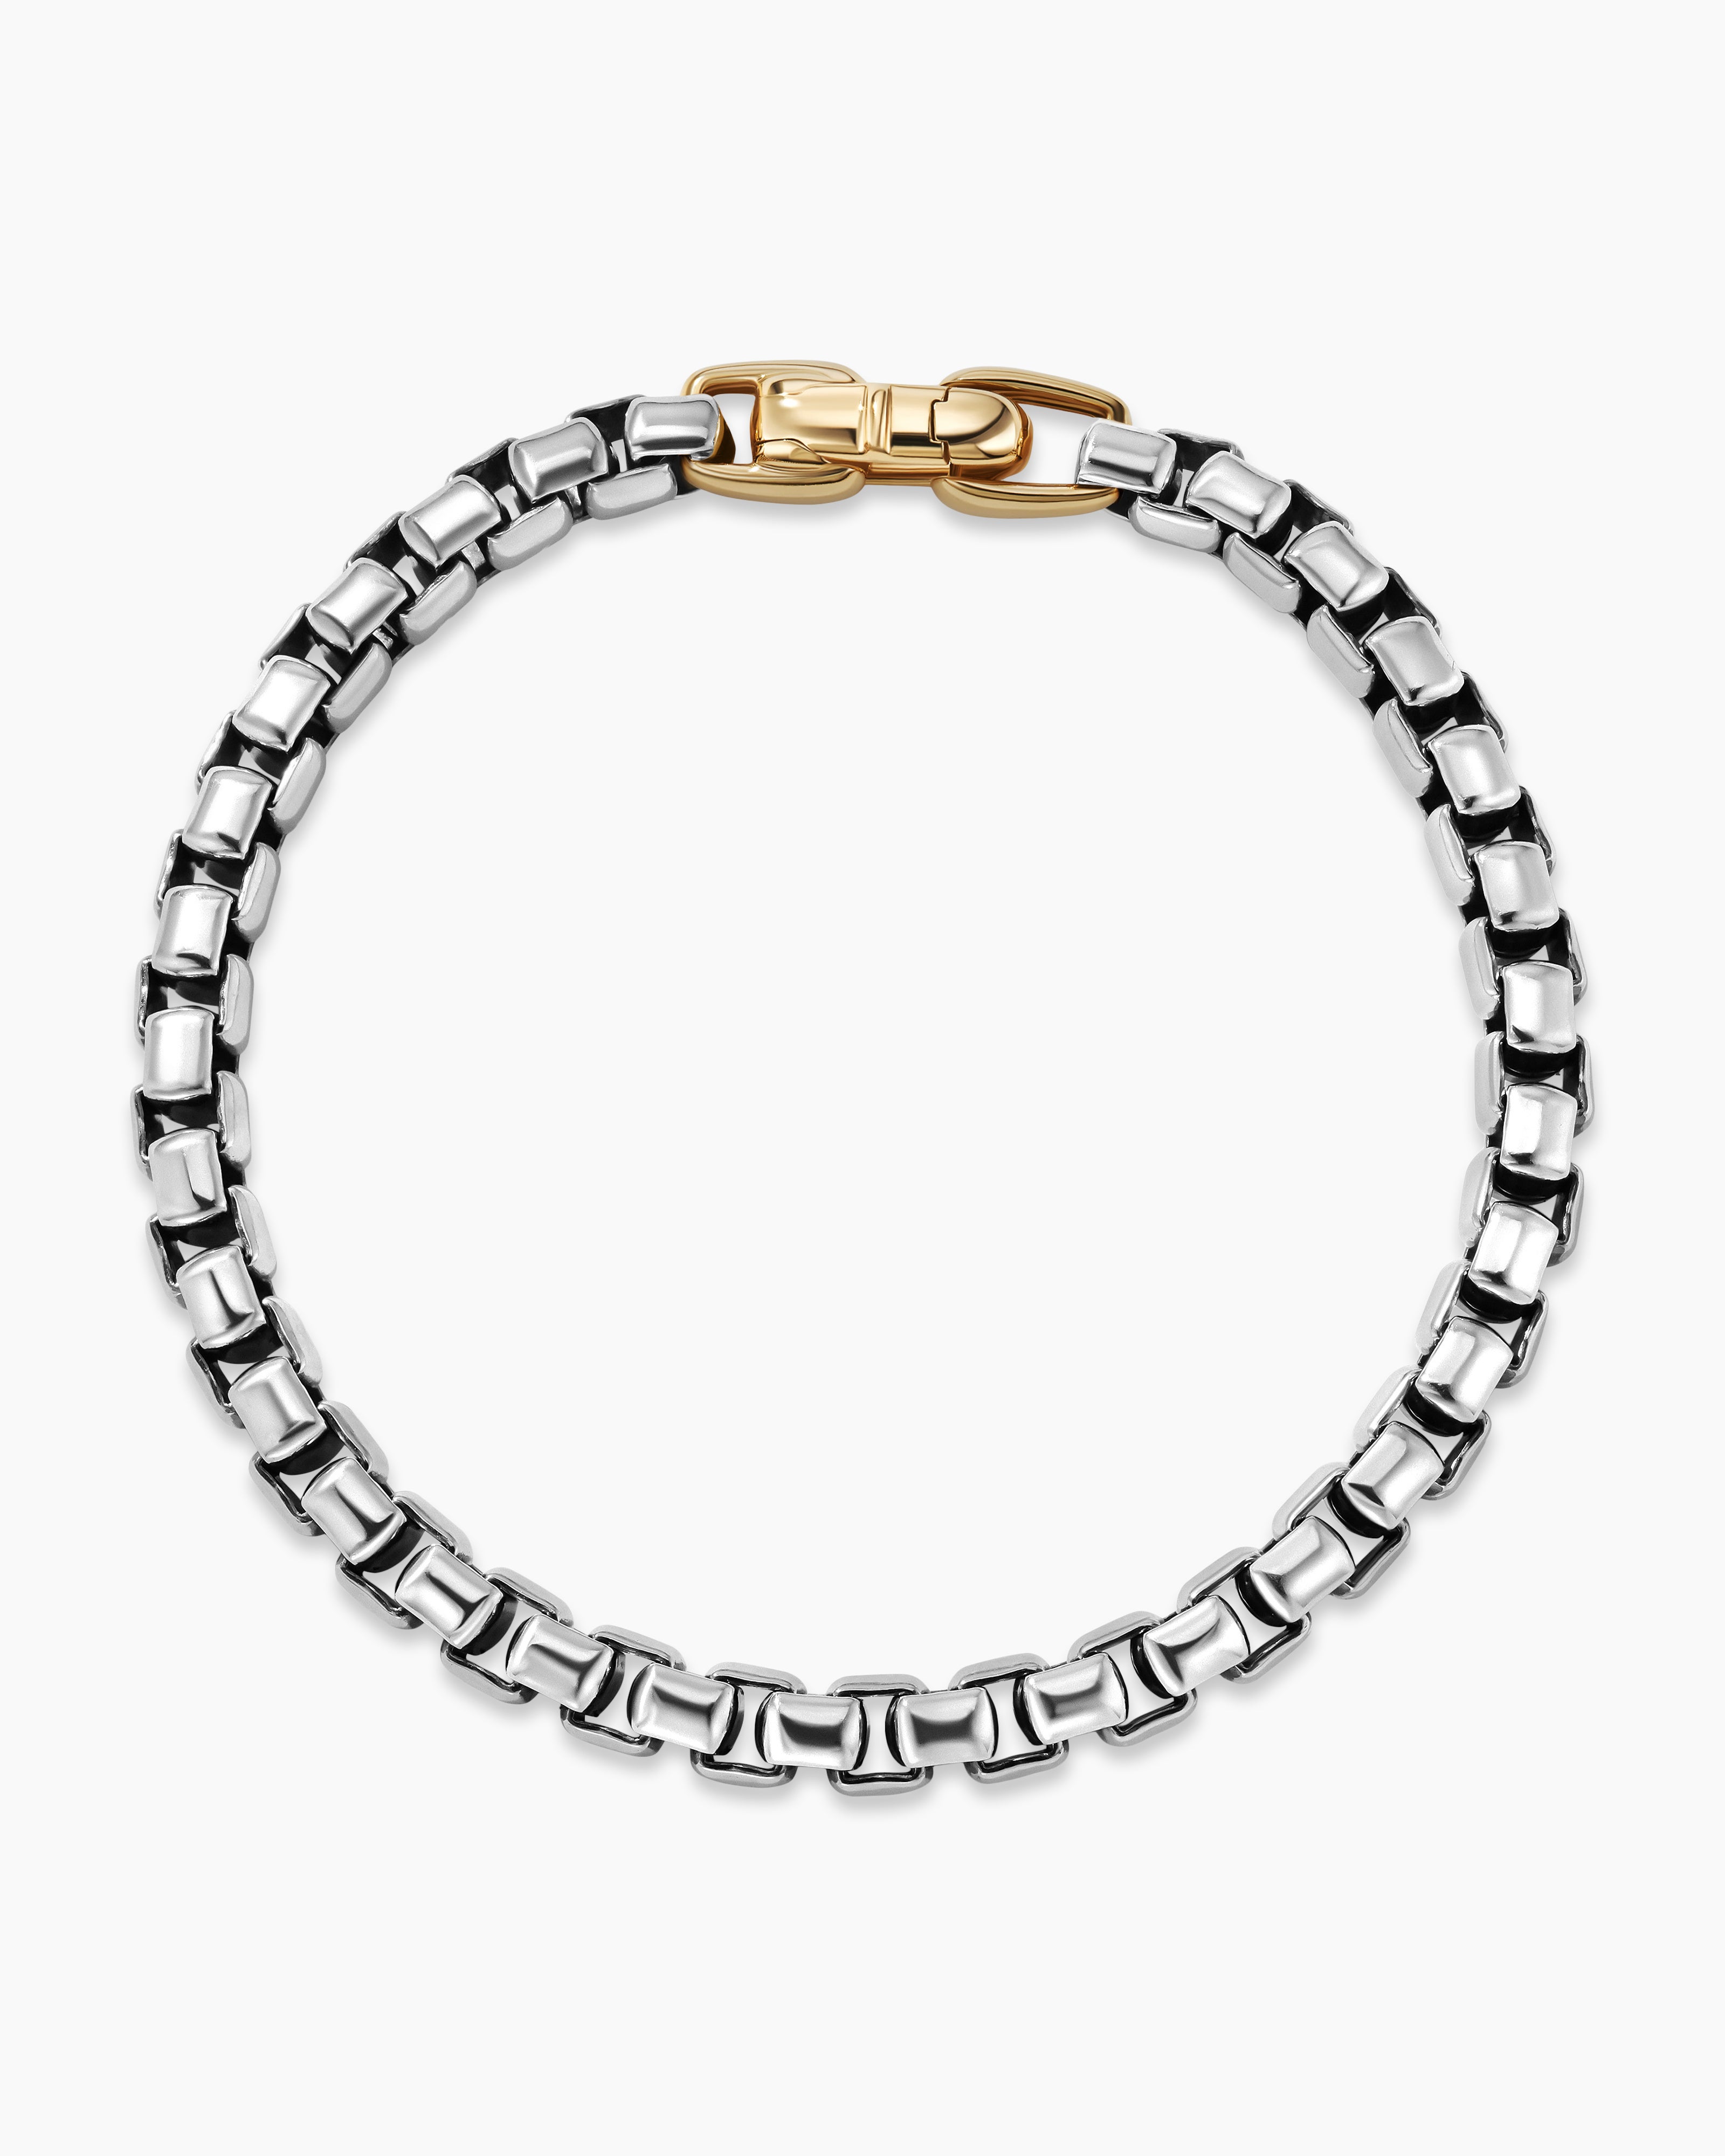 DY Yellow | Bel Box Gold, 6mm with Sterling Yurman 14K Chain David Bracelet Silver in Aire